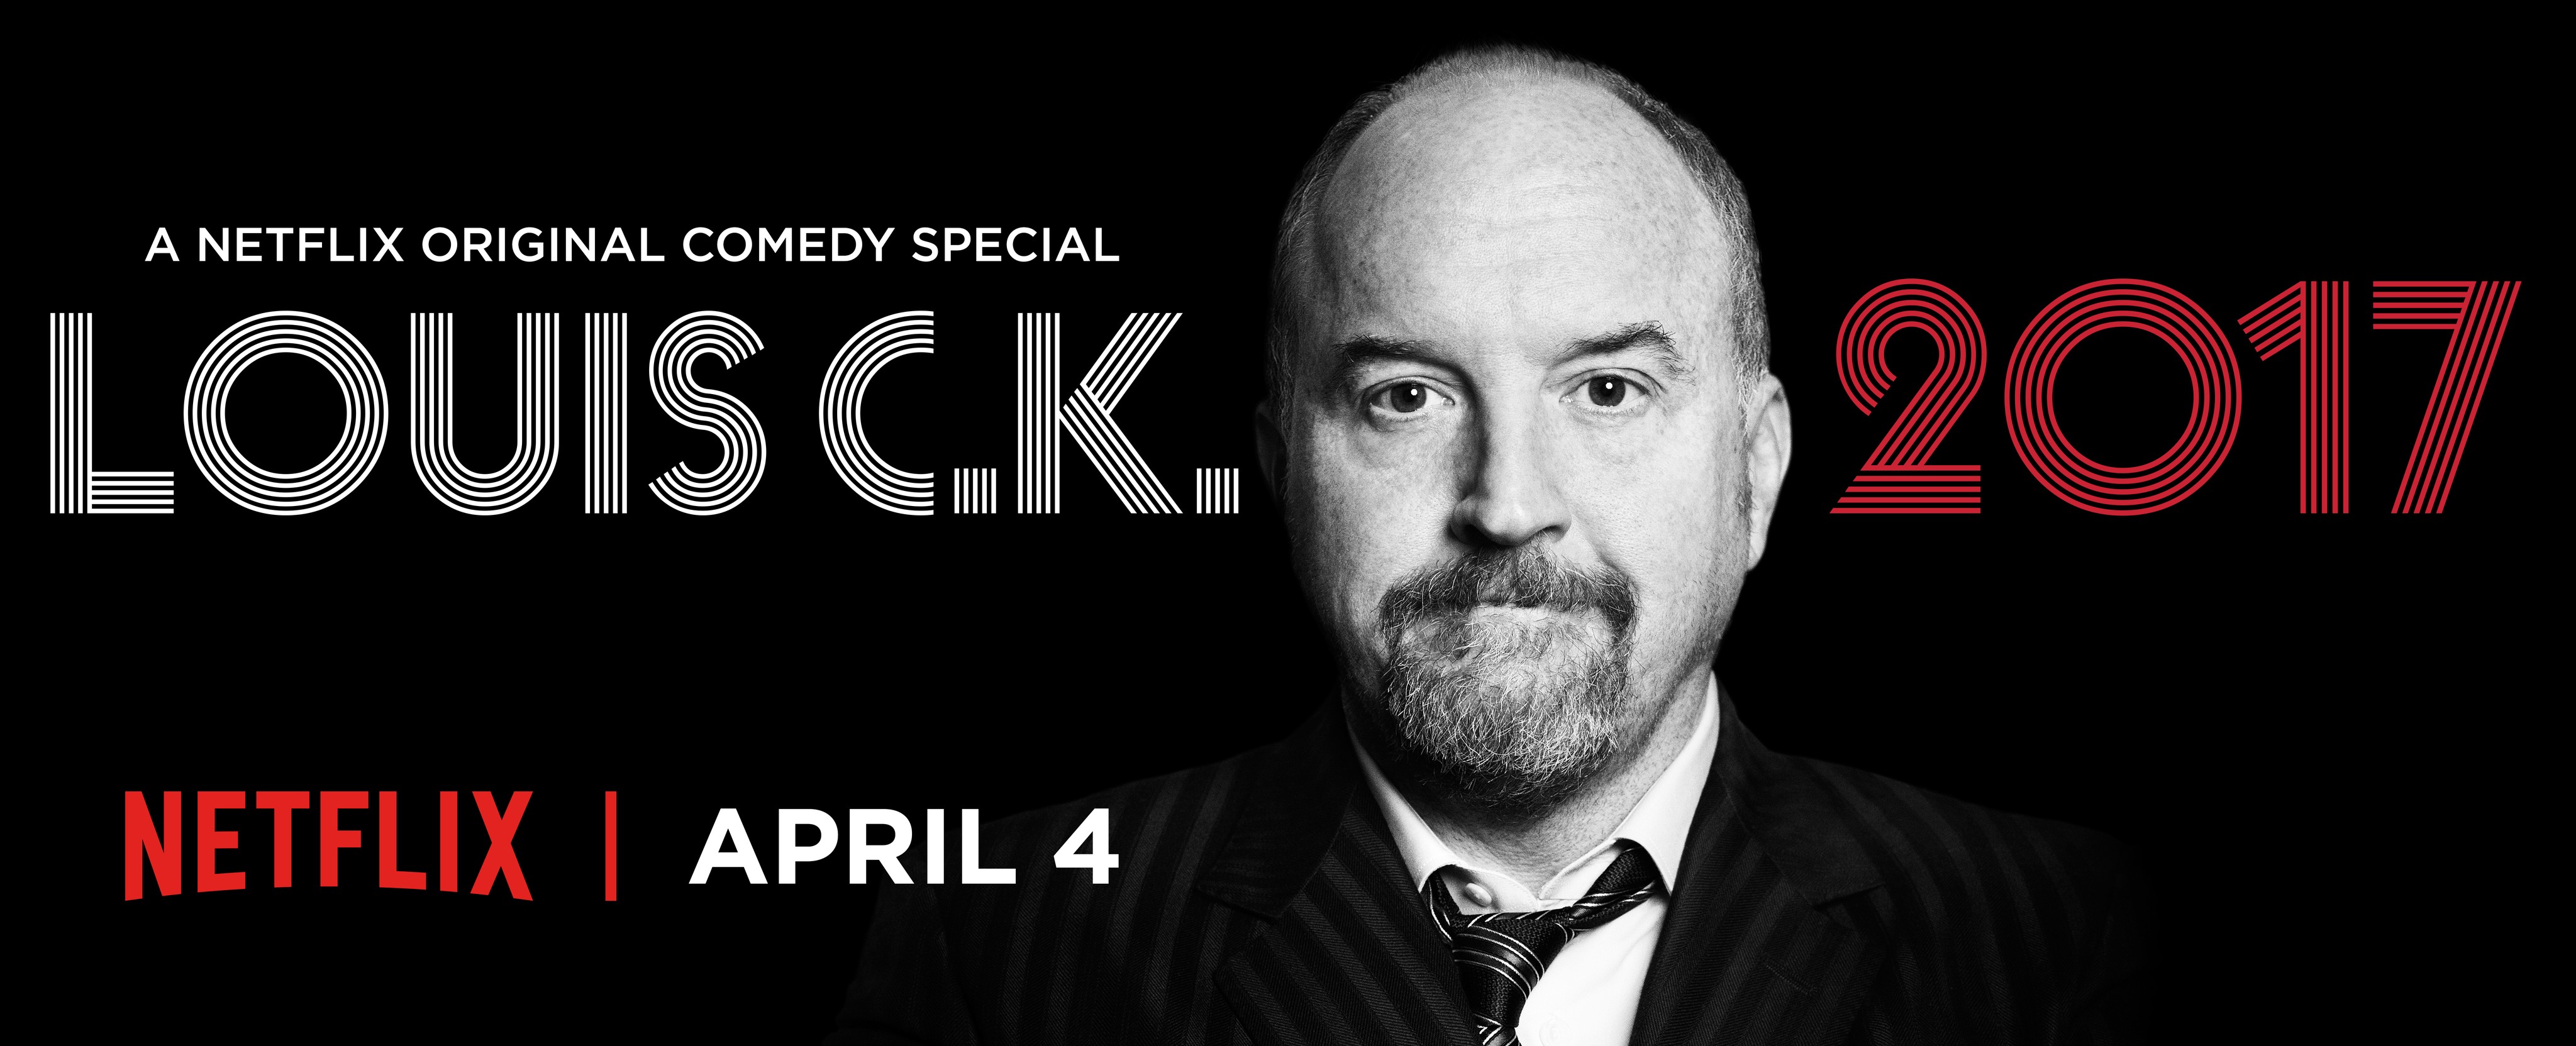 Louis C.K.: Chewed Up - Where to Watch and Stream - TV Guide